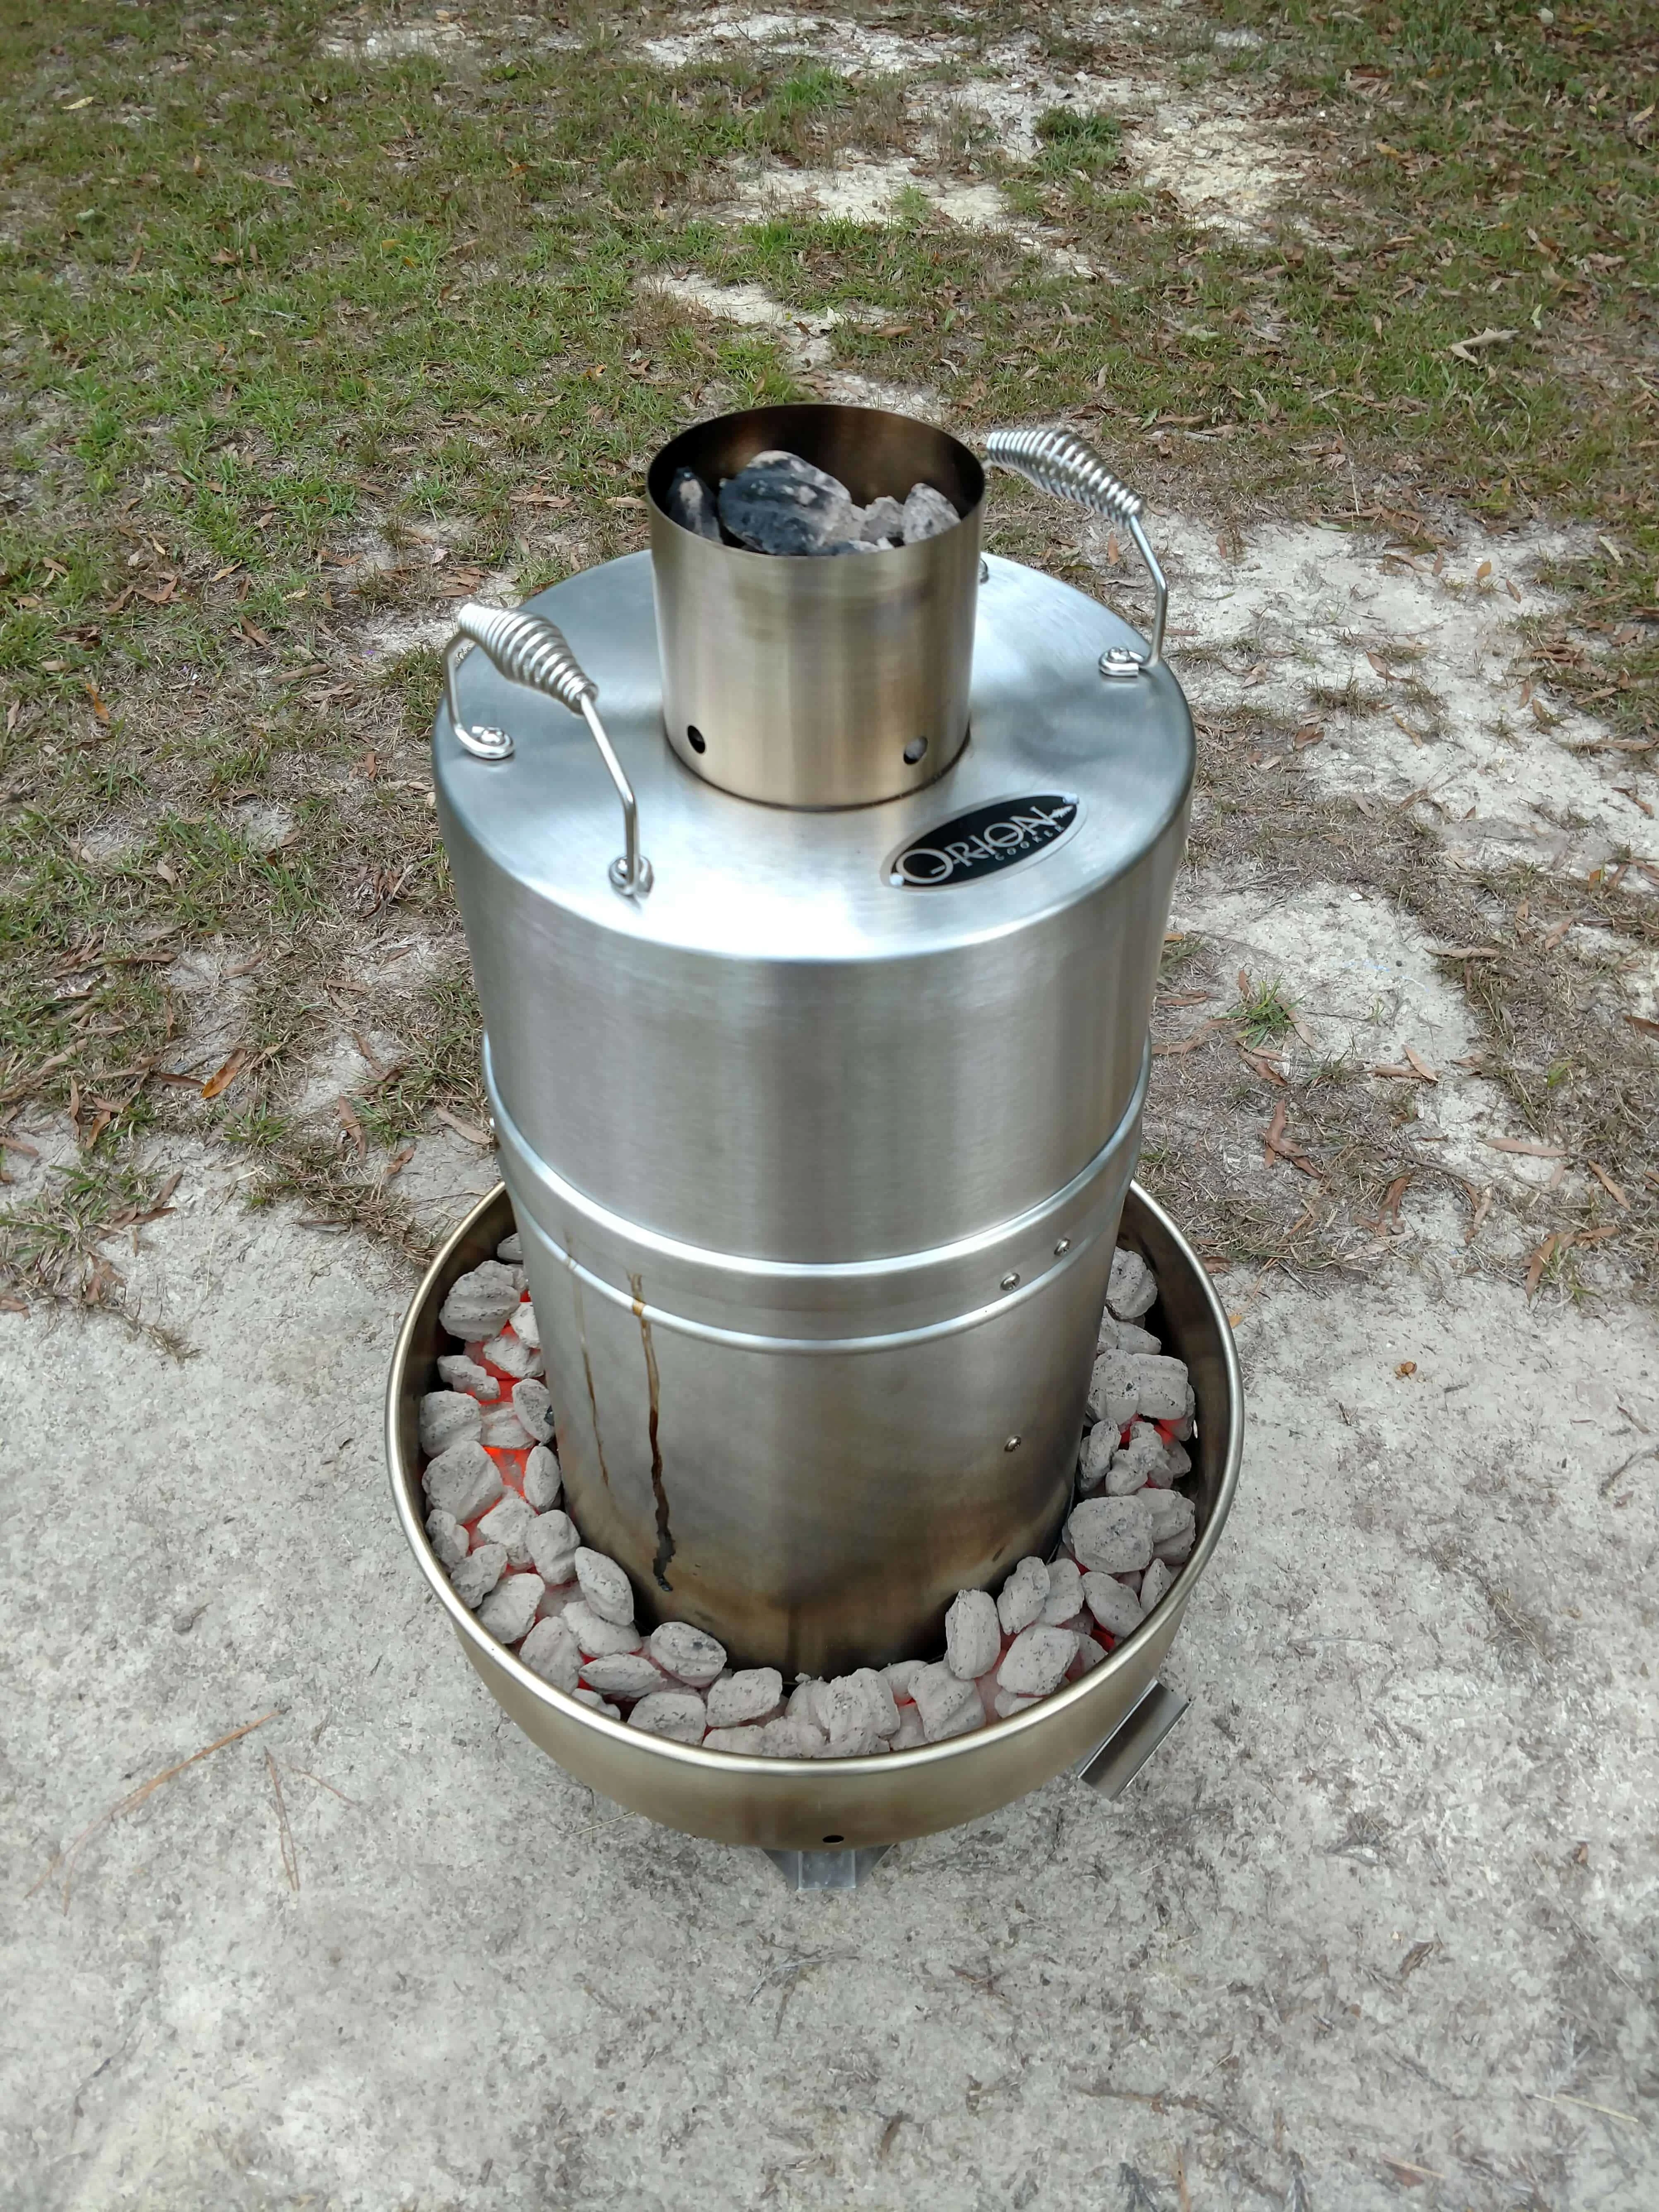 picture of the orion cooker with charcoal lit.